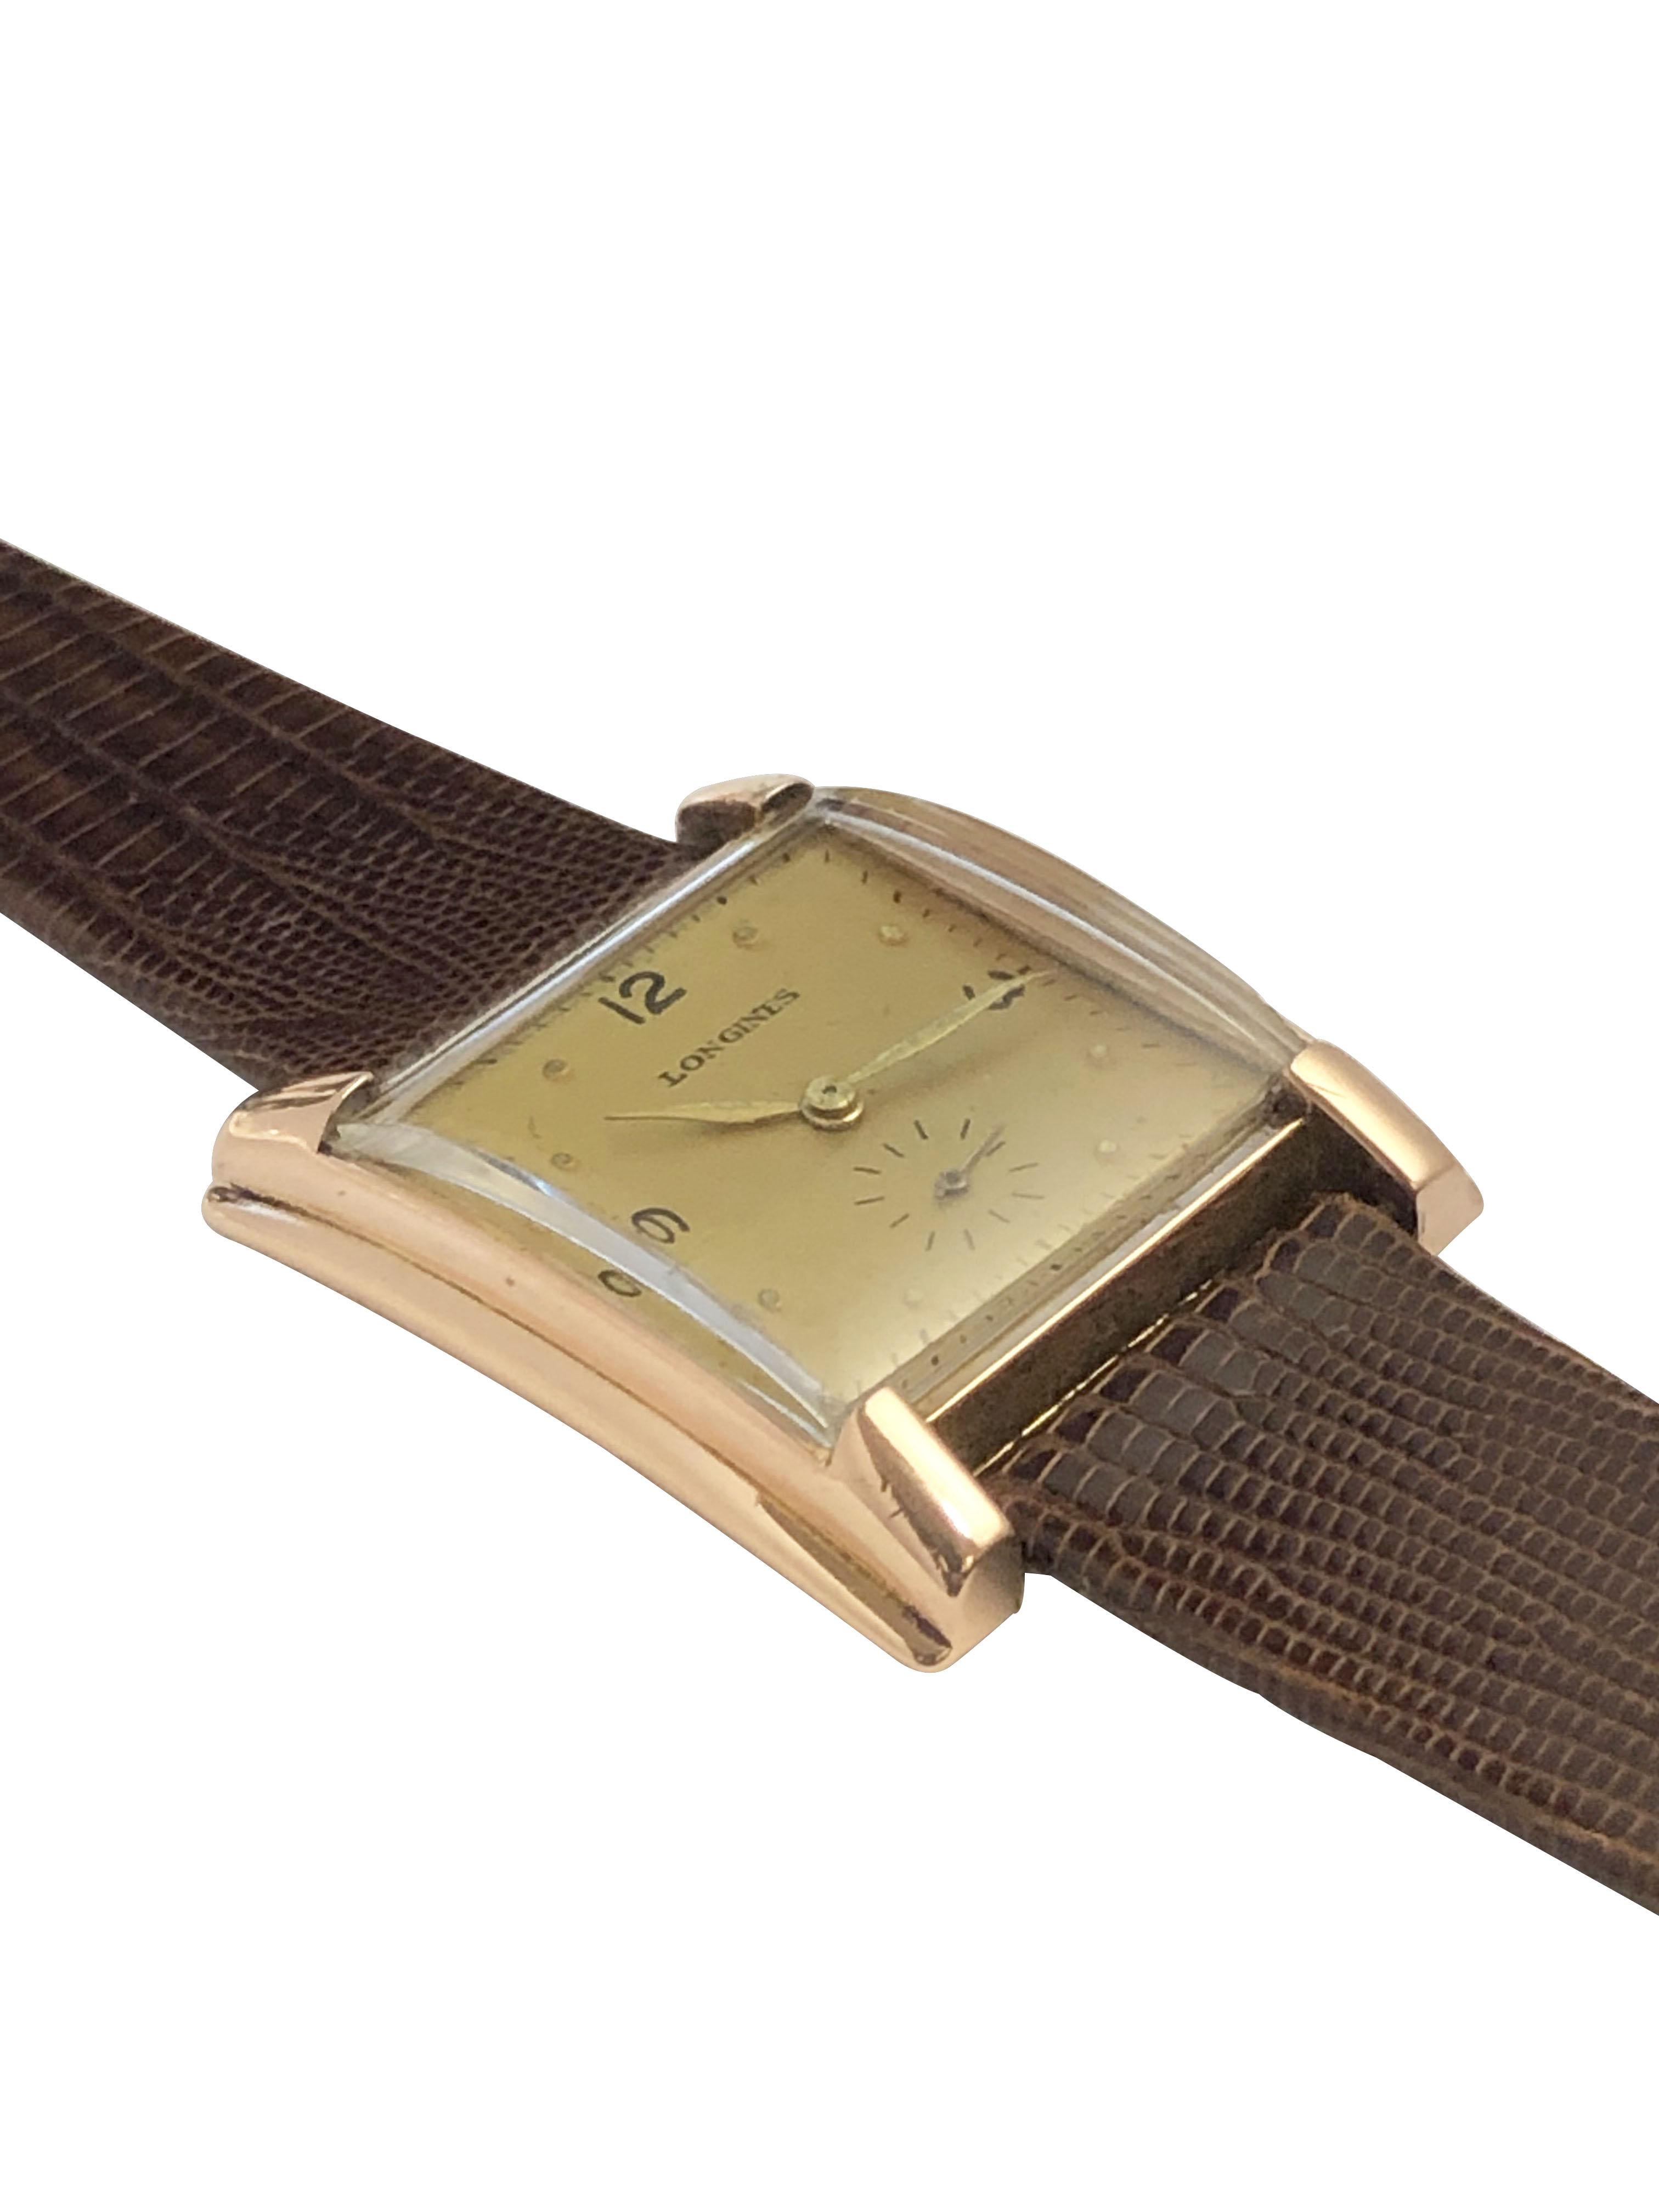 Circa late 1940s Longines Wrist Watch, 29 X 25 M.M. 14k Rose Gold 2 Piece stepped sides case, 17 Jewel Mechanical, manual wind movement, Gold Tone dial with raised Markers and a sweep seconds hand. New Brown Lizard Strap. Recently serviced and comes